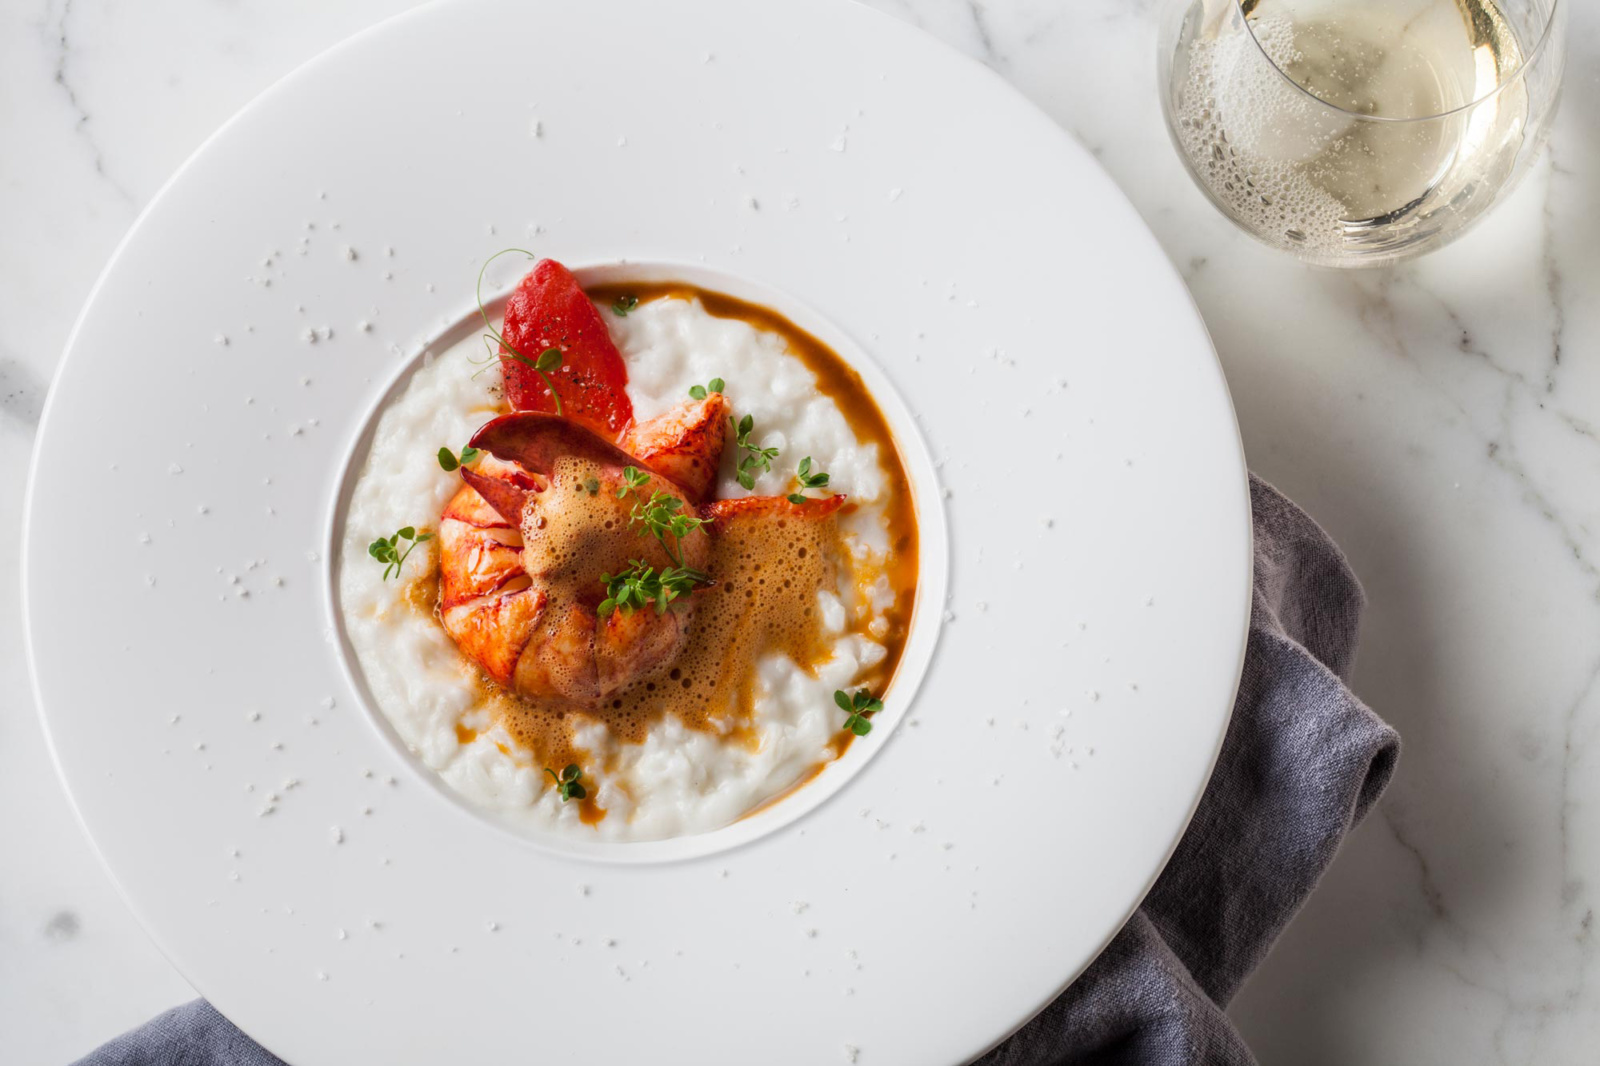 Food photography of lobster risotto, art directed by Nesnadny and Schwartz for the Cru Uncorked identity